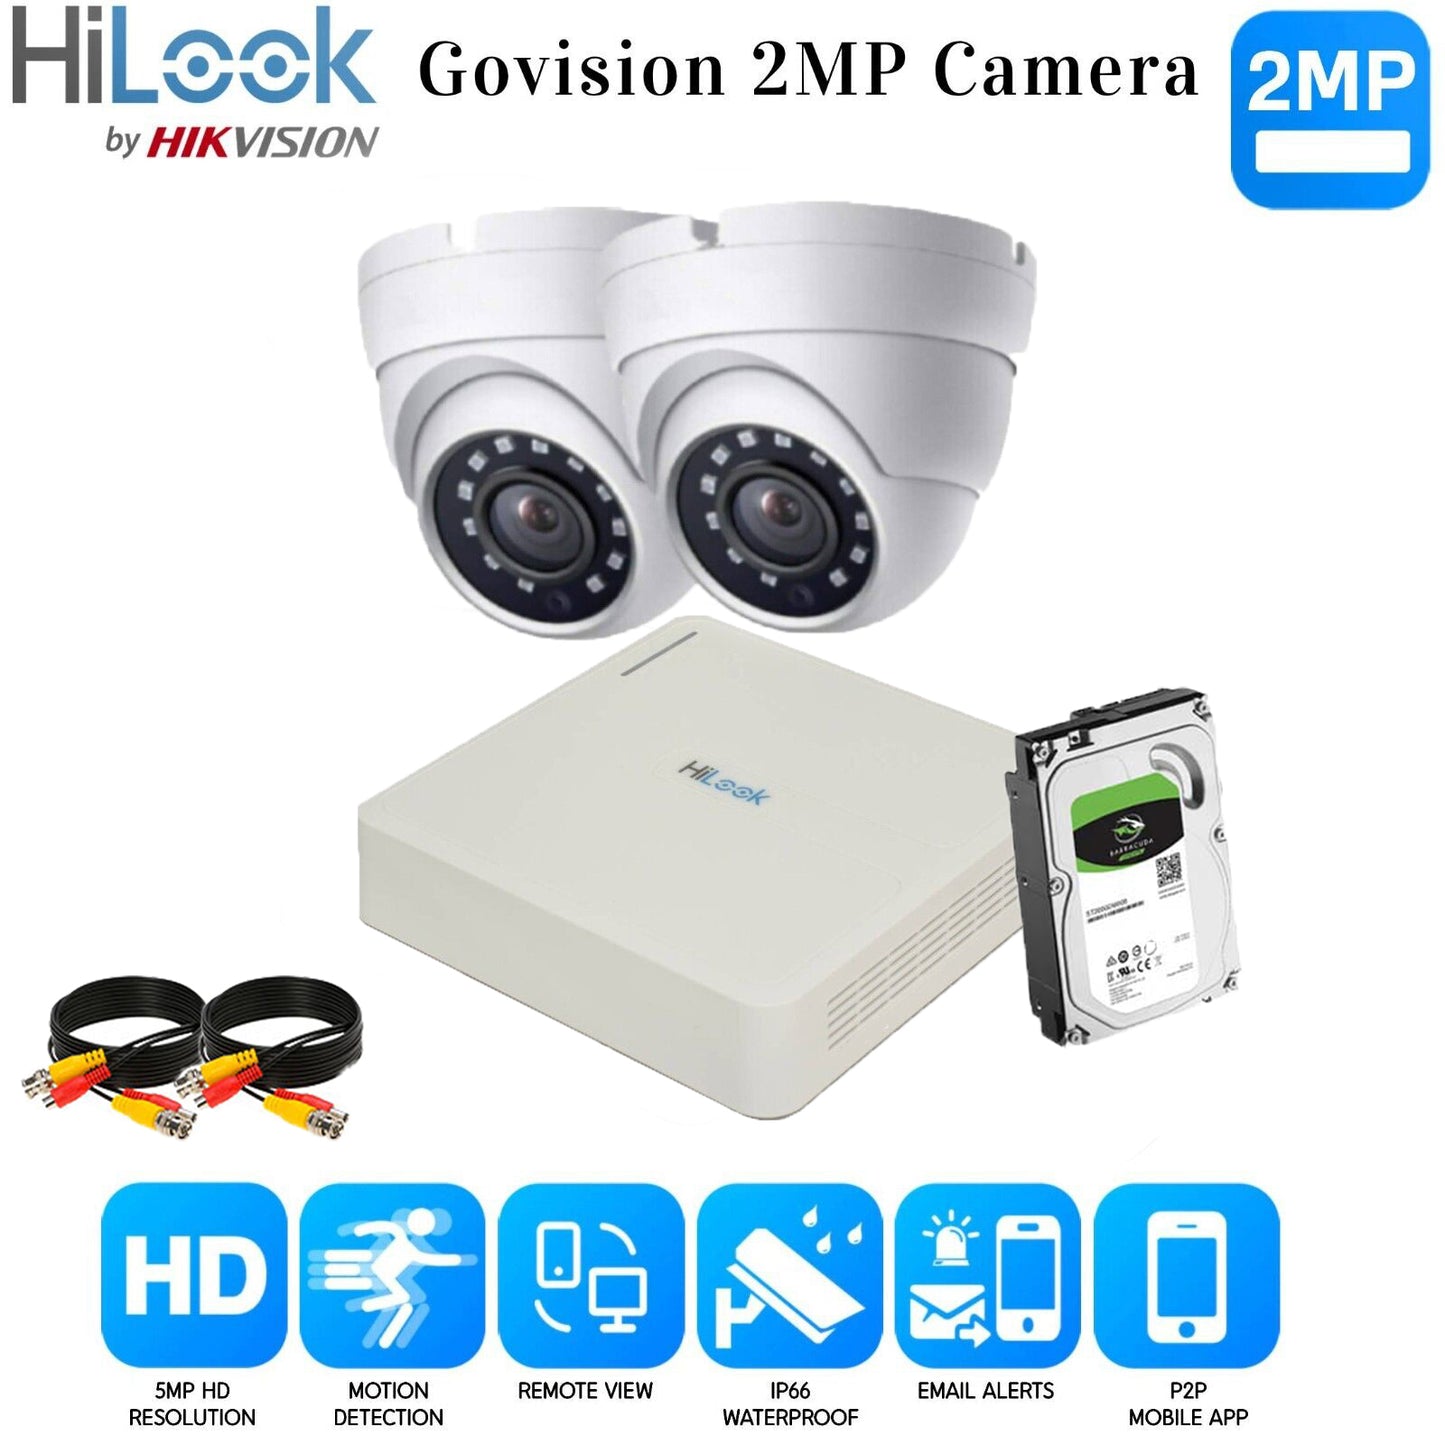 Hikvision Home Outdoor CCTV Security Camera System Kit HD 1080P 4CH DVR IR NIGHT 4CH DVR 2xCameras (white) 2TB HDD